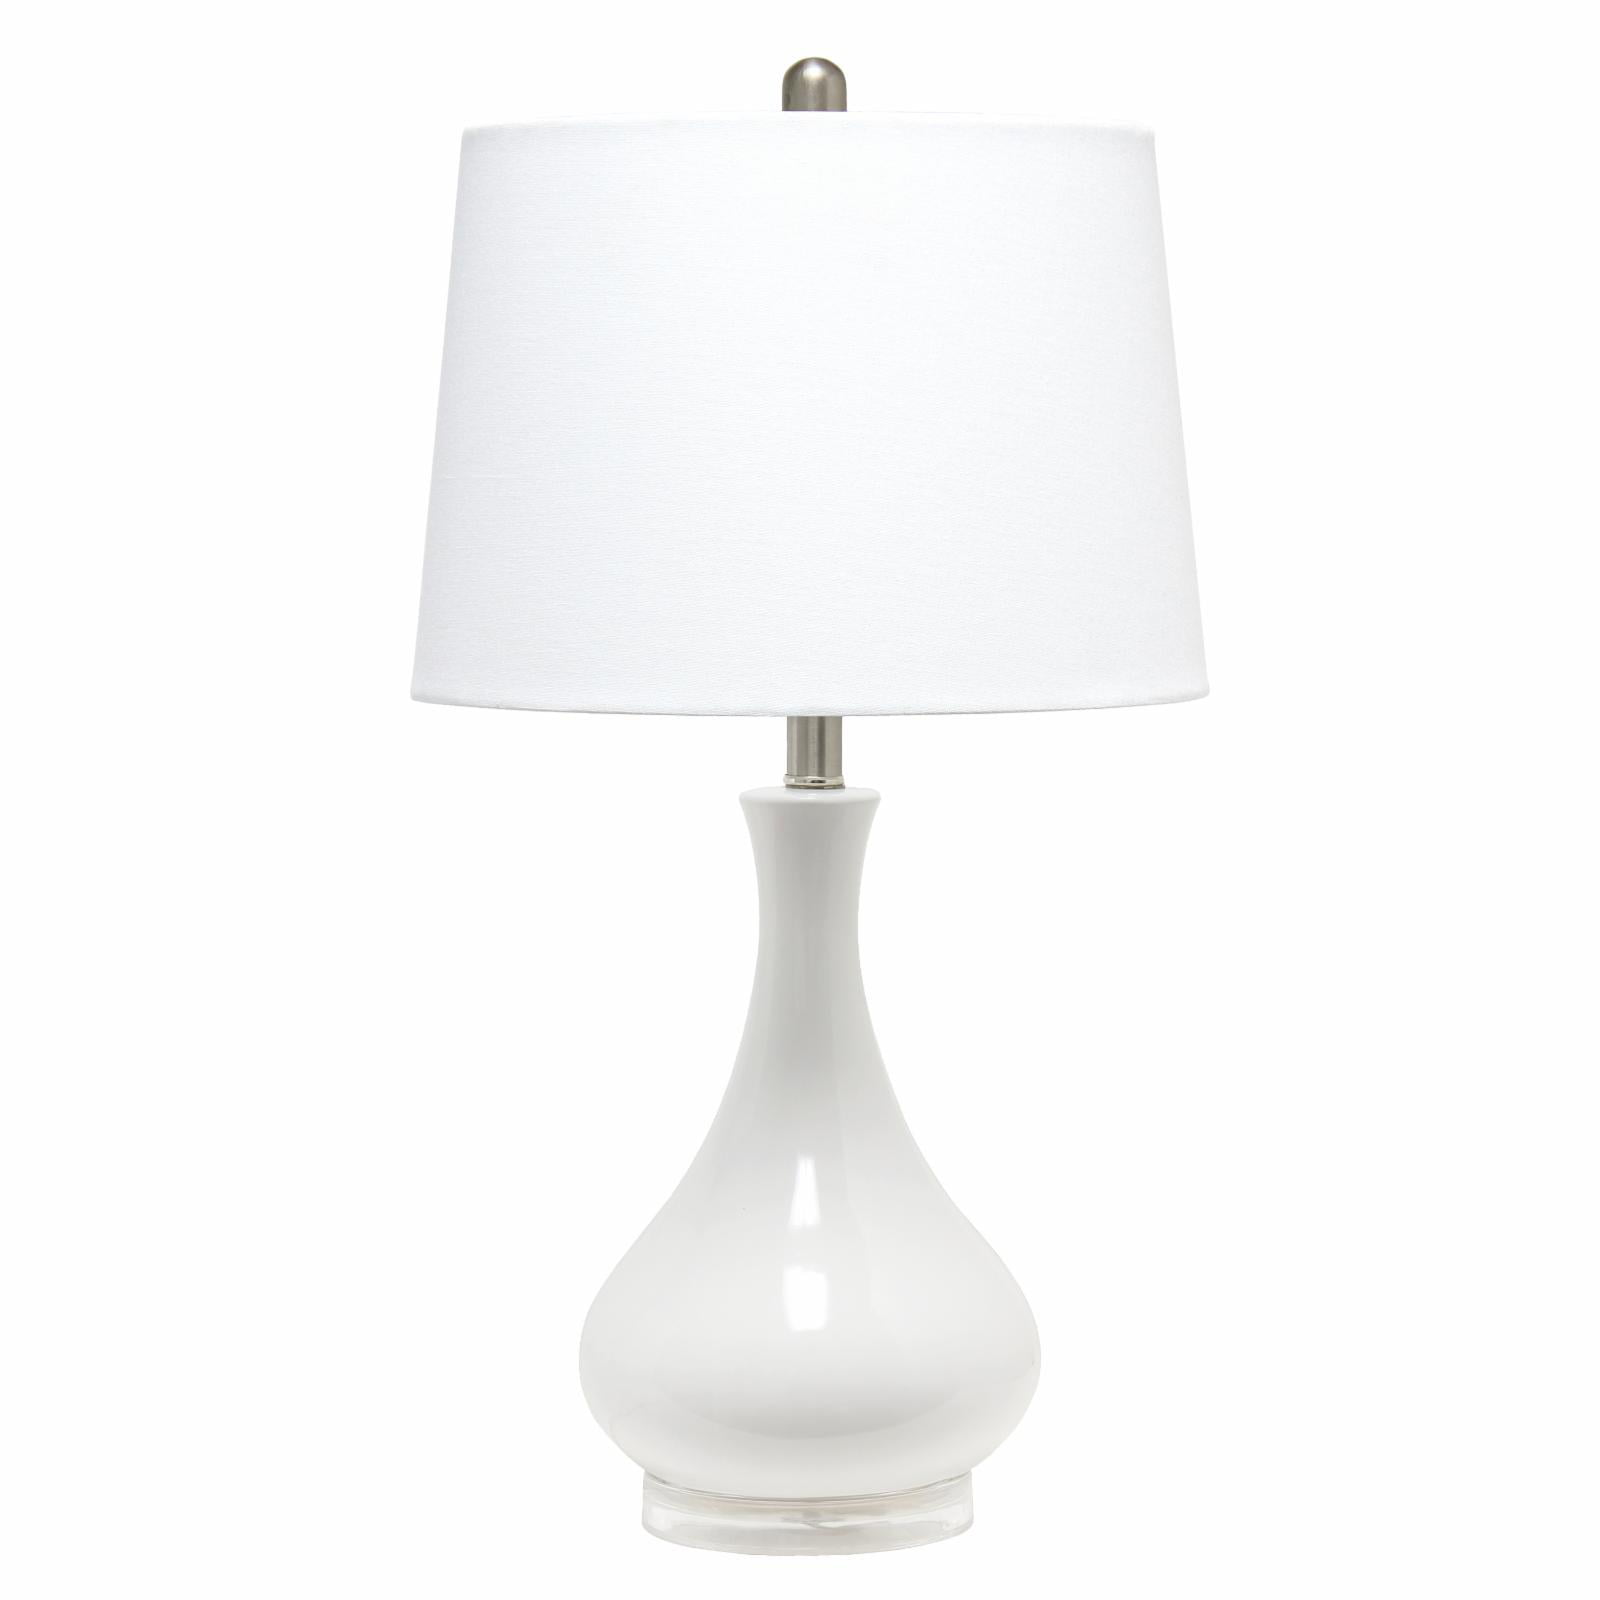 Lalia Home Droplet Table Lamp with Fabric Shade, White